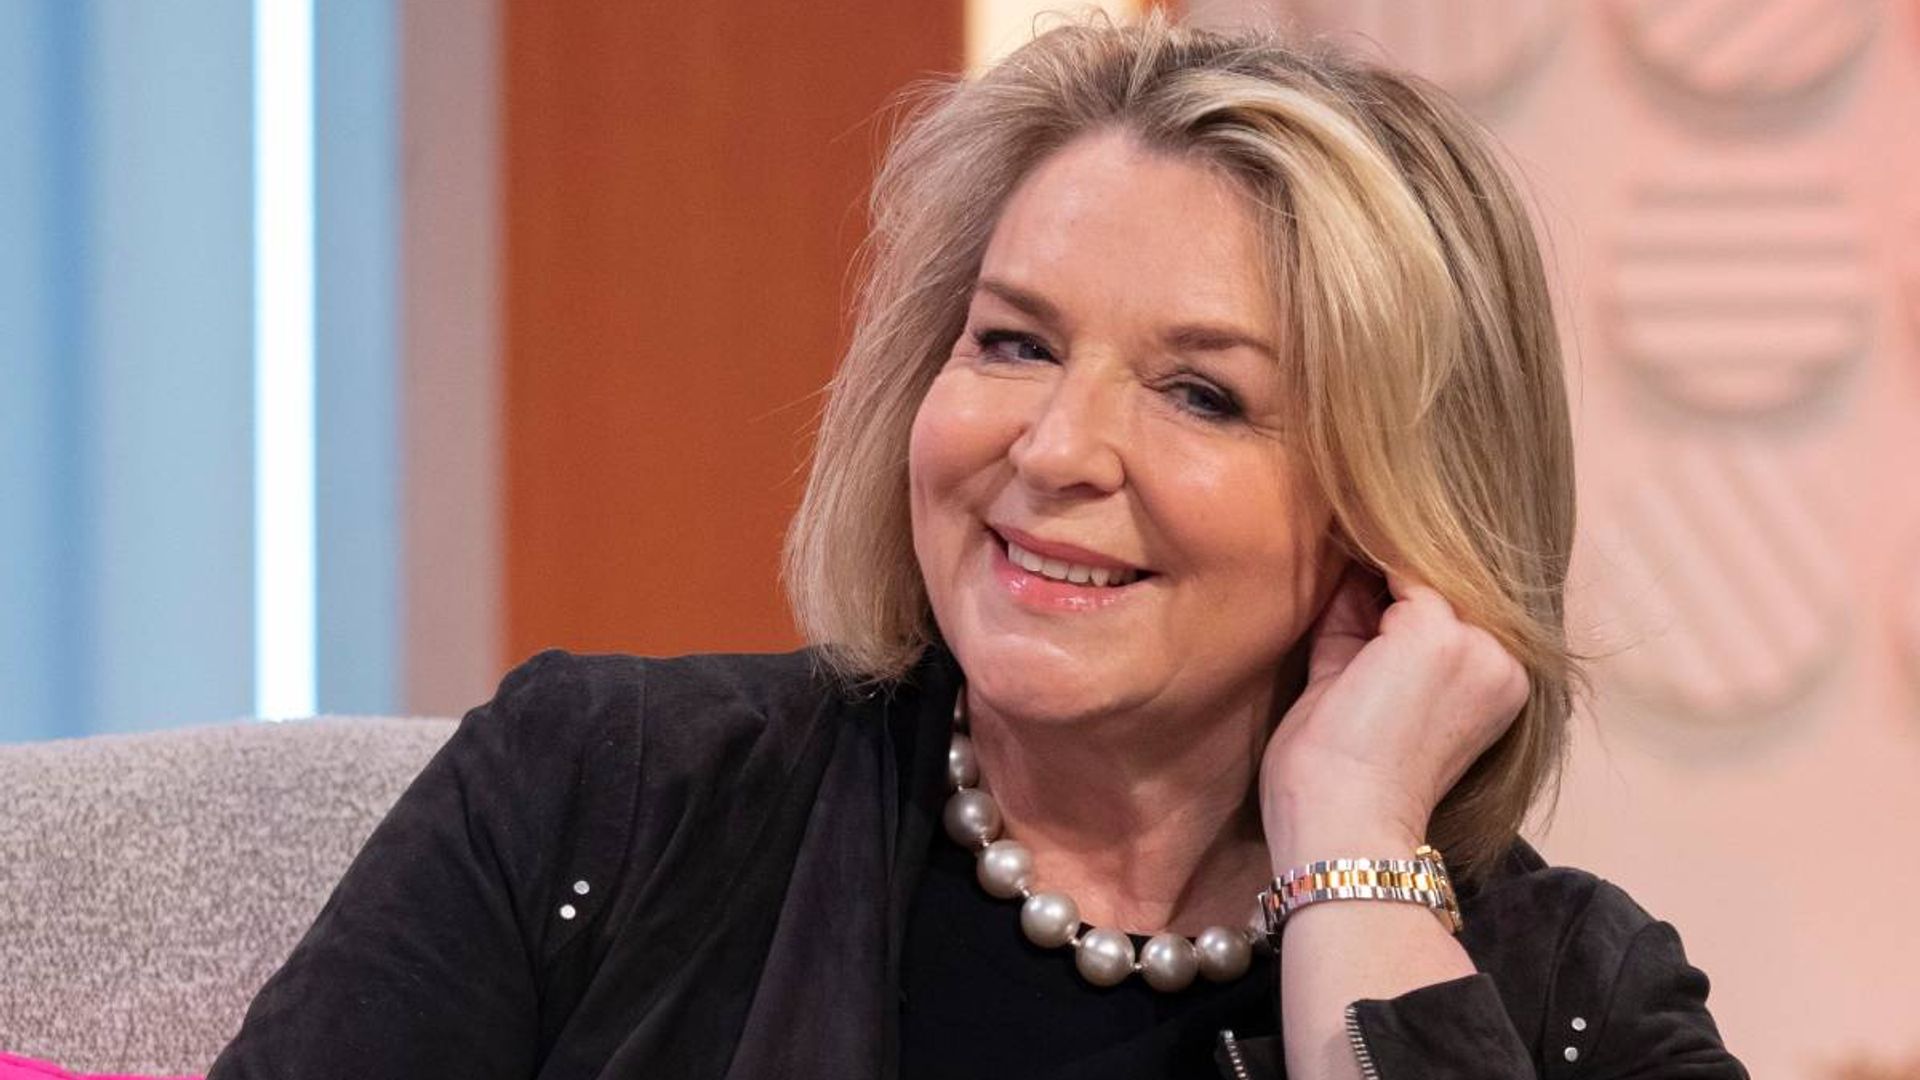 Fern Britton opens up about her fun night out following split – and fans are delighted